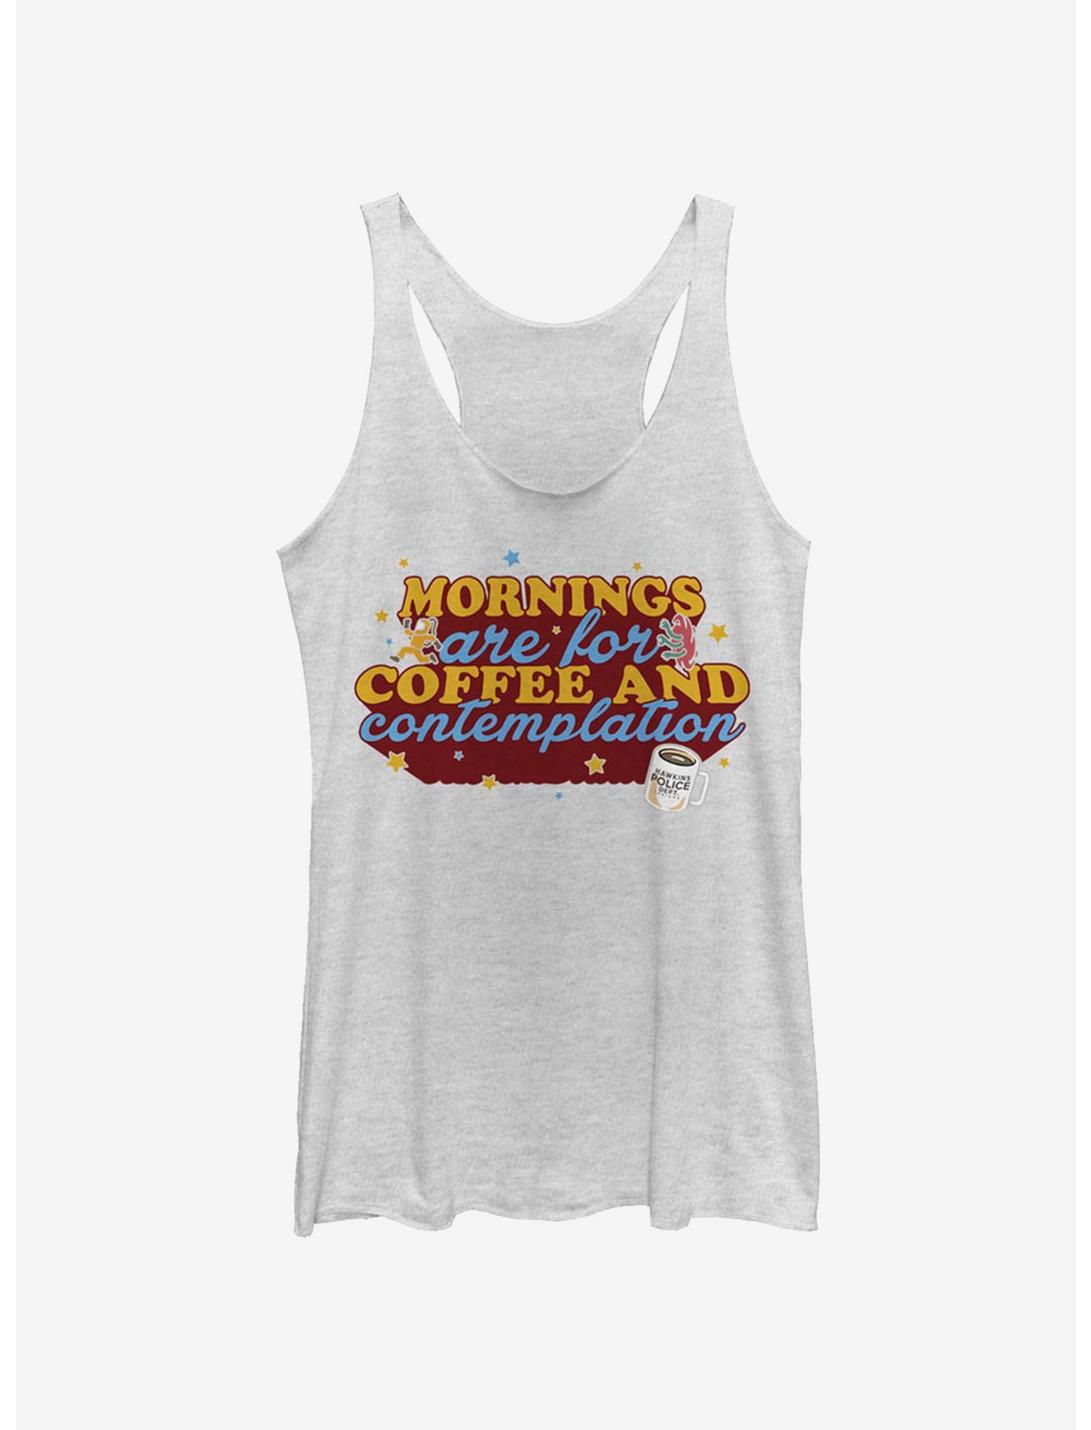 Stranger Things Coffee Contemplations Girls Tank Top, WHITE HTR, hi-res